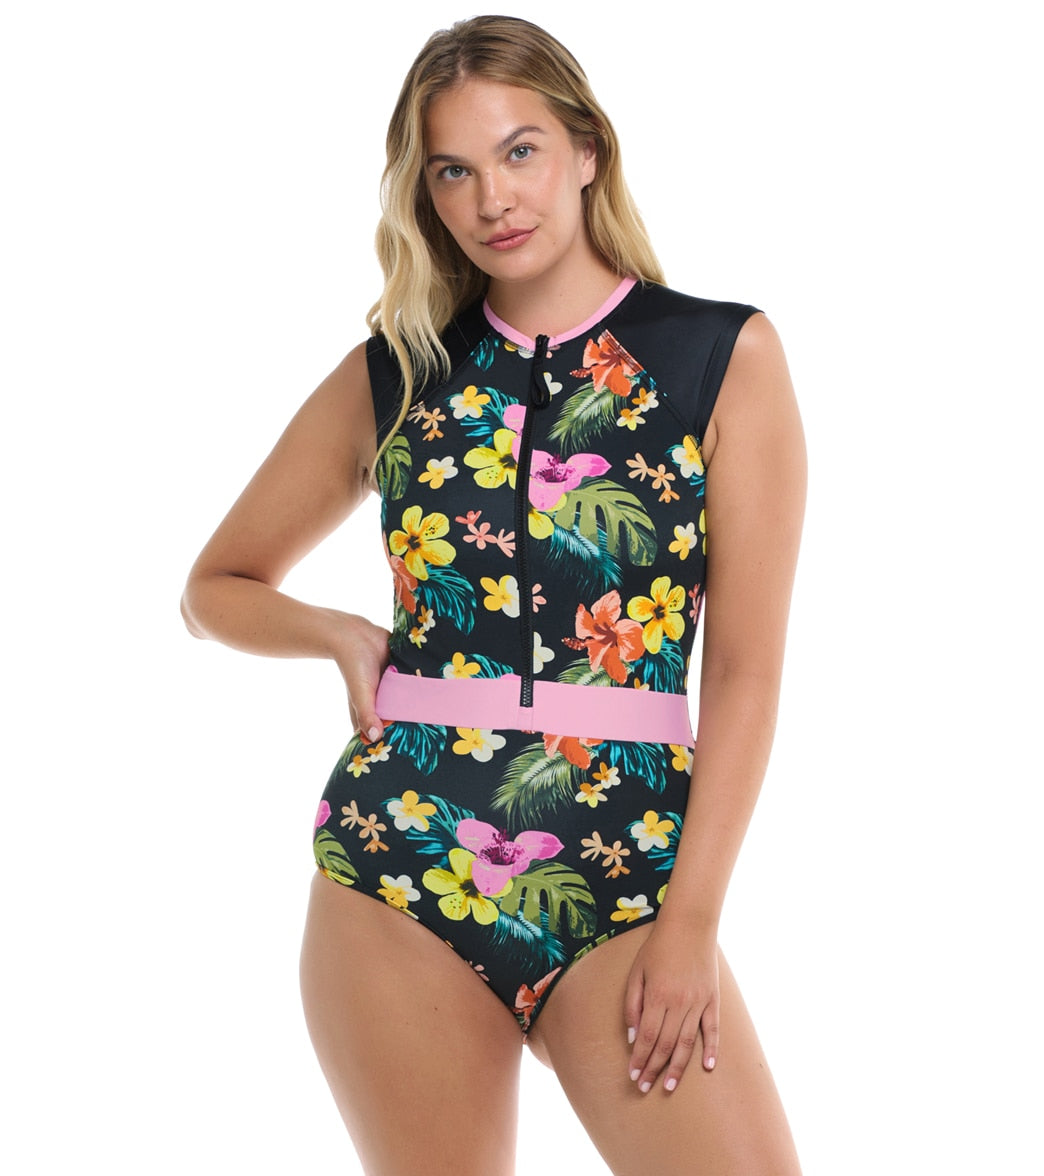 Body Glove Womens Tropical Island Stand Up One Piece Swimsuit (Paddle Suit)